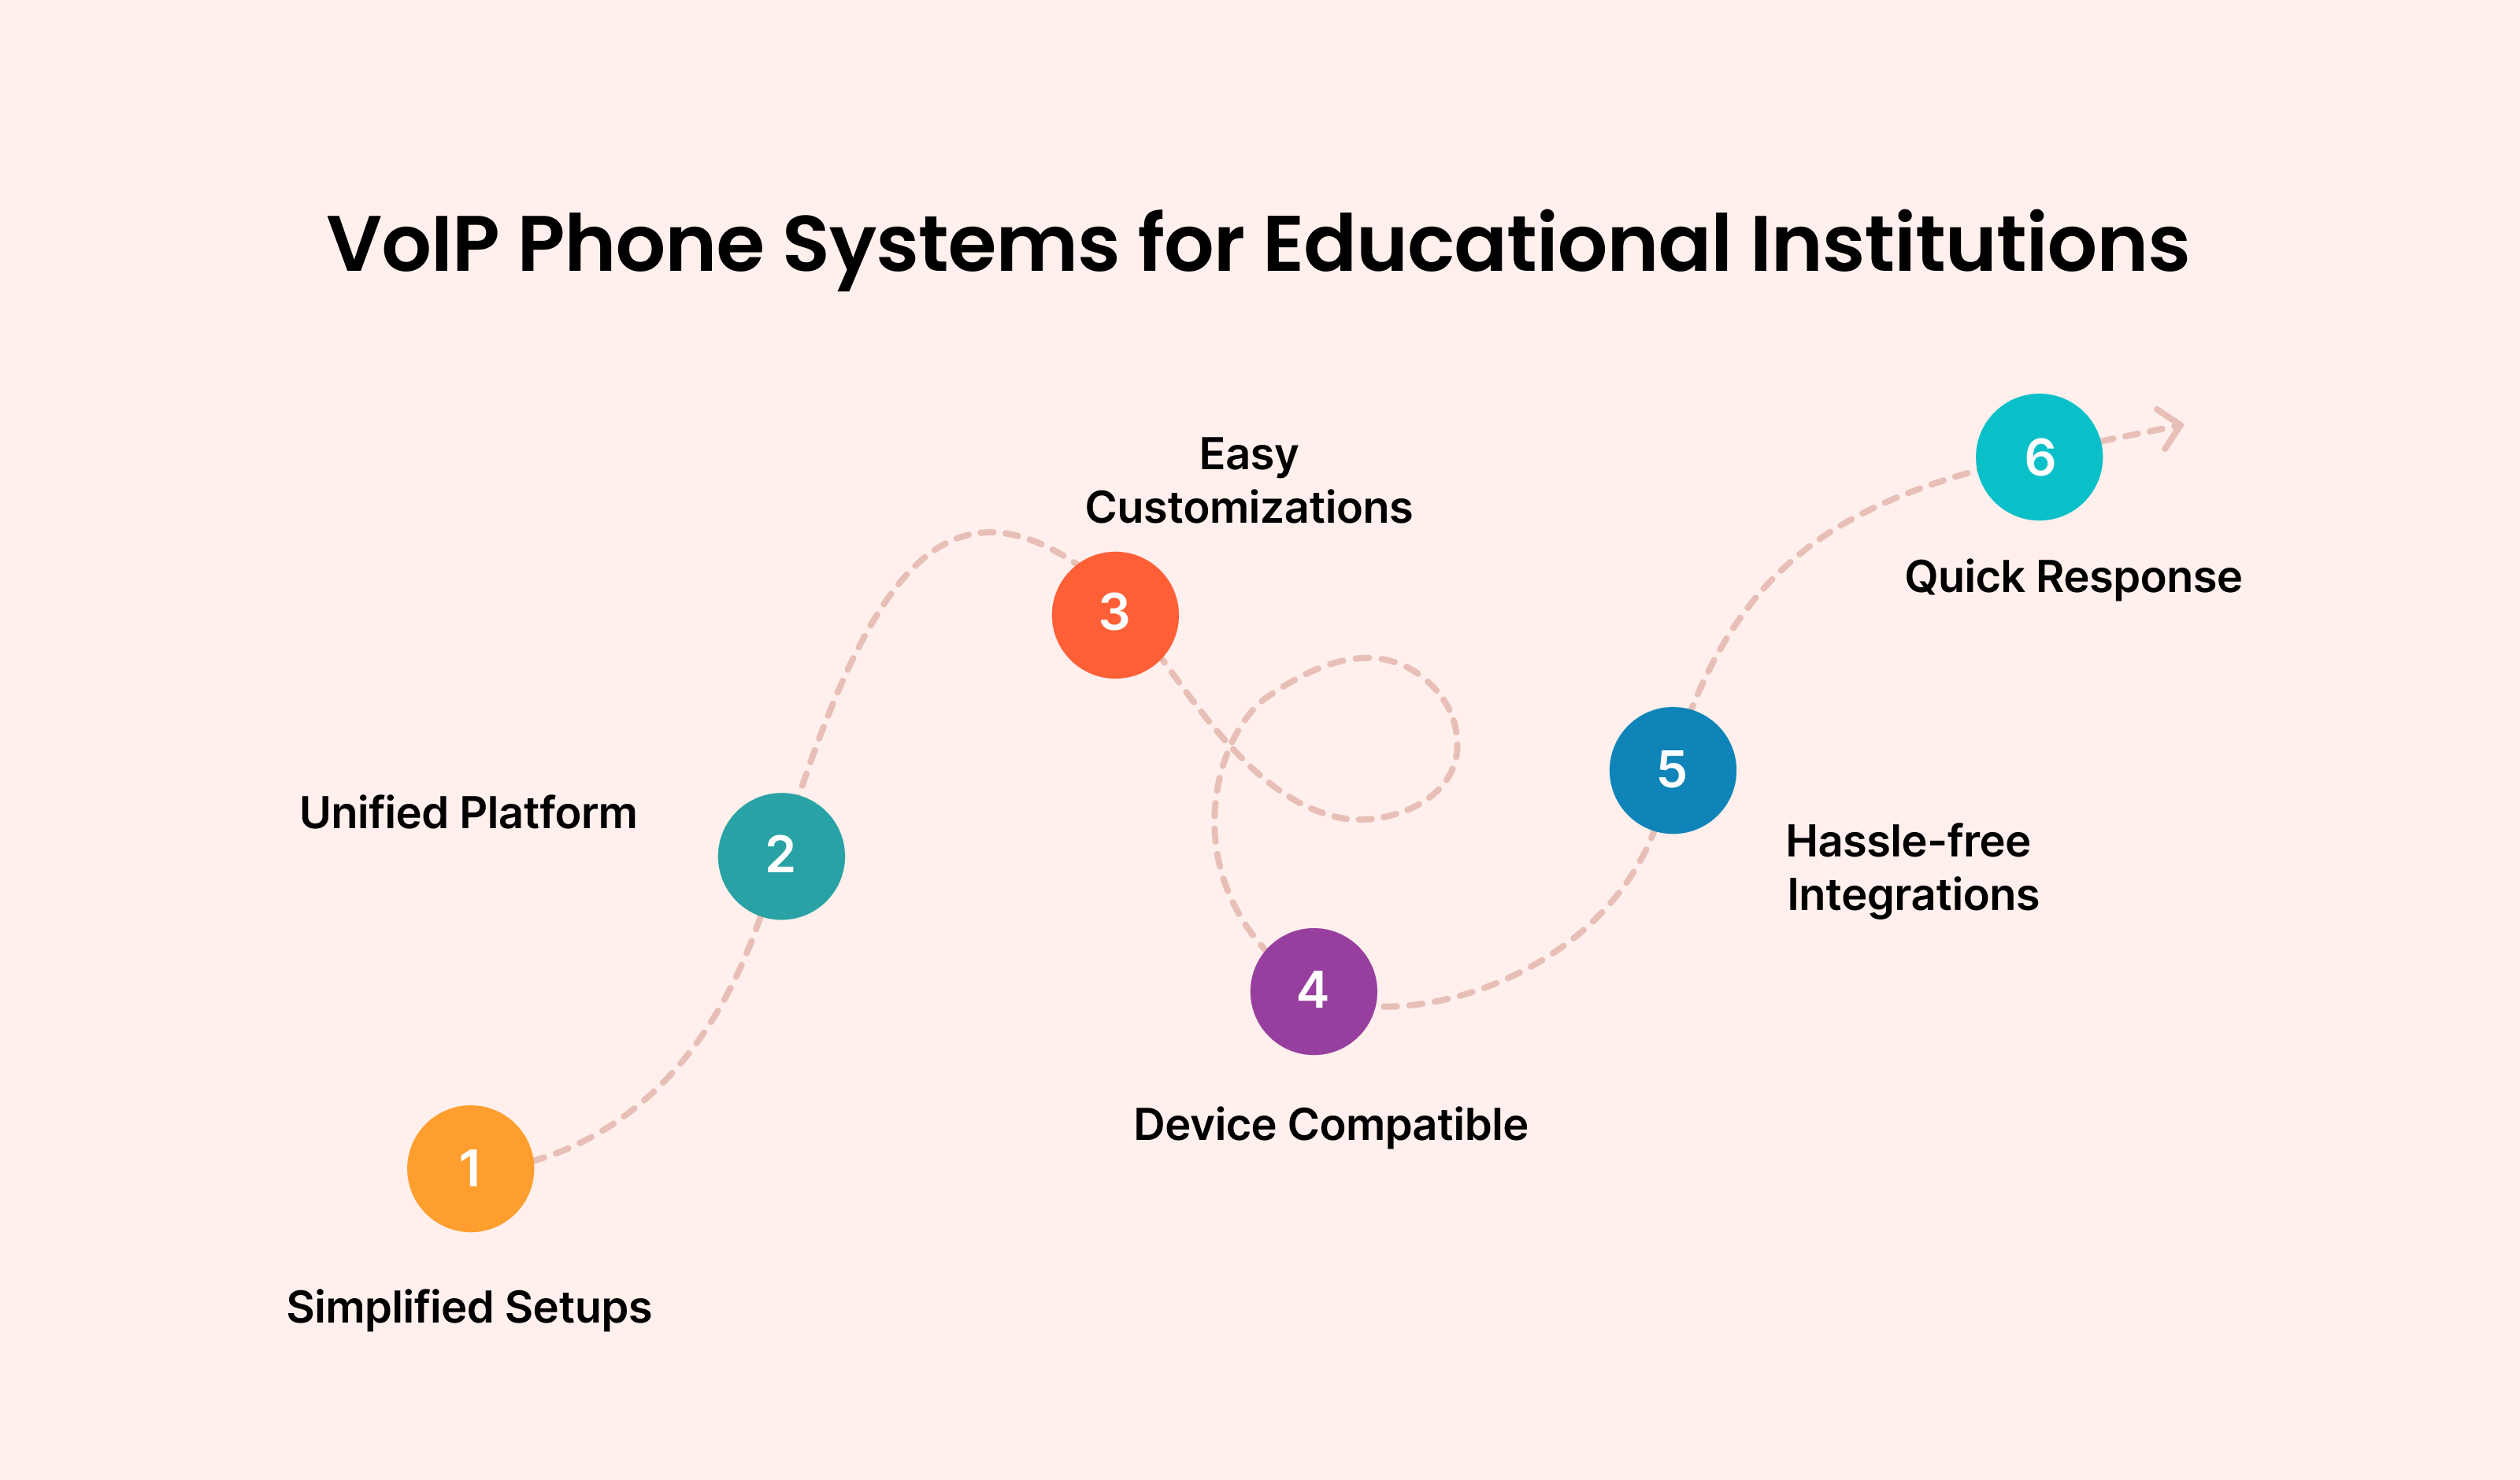 VoIP Phone Systems for Educational Institutions: